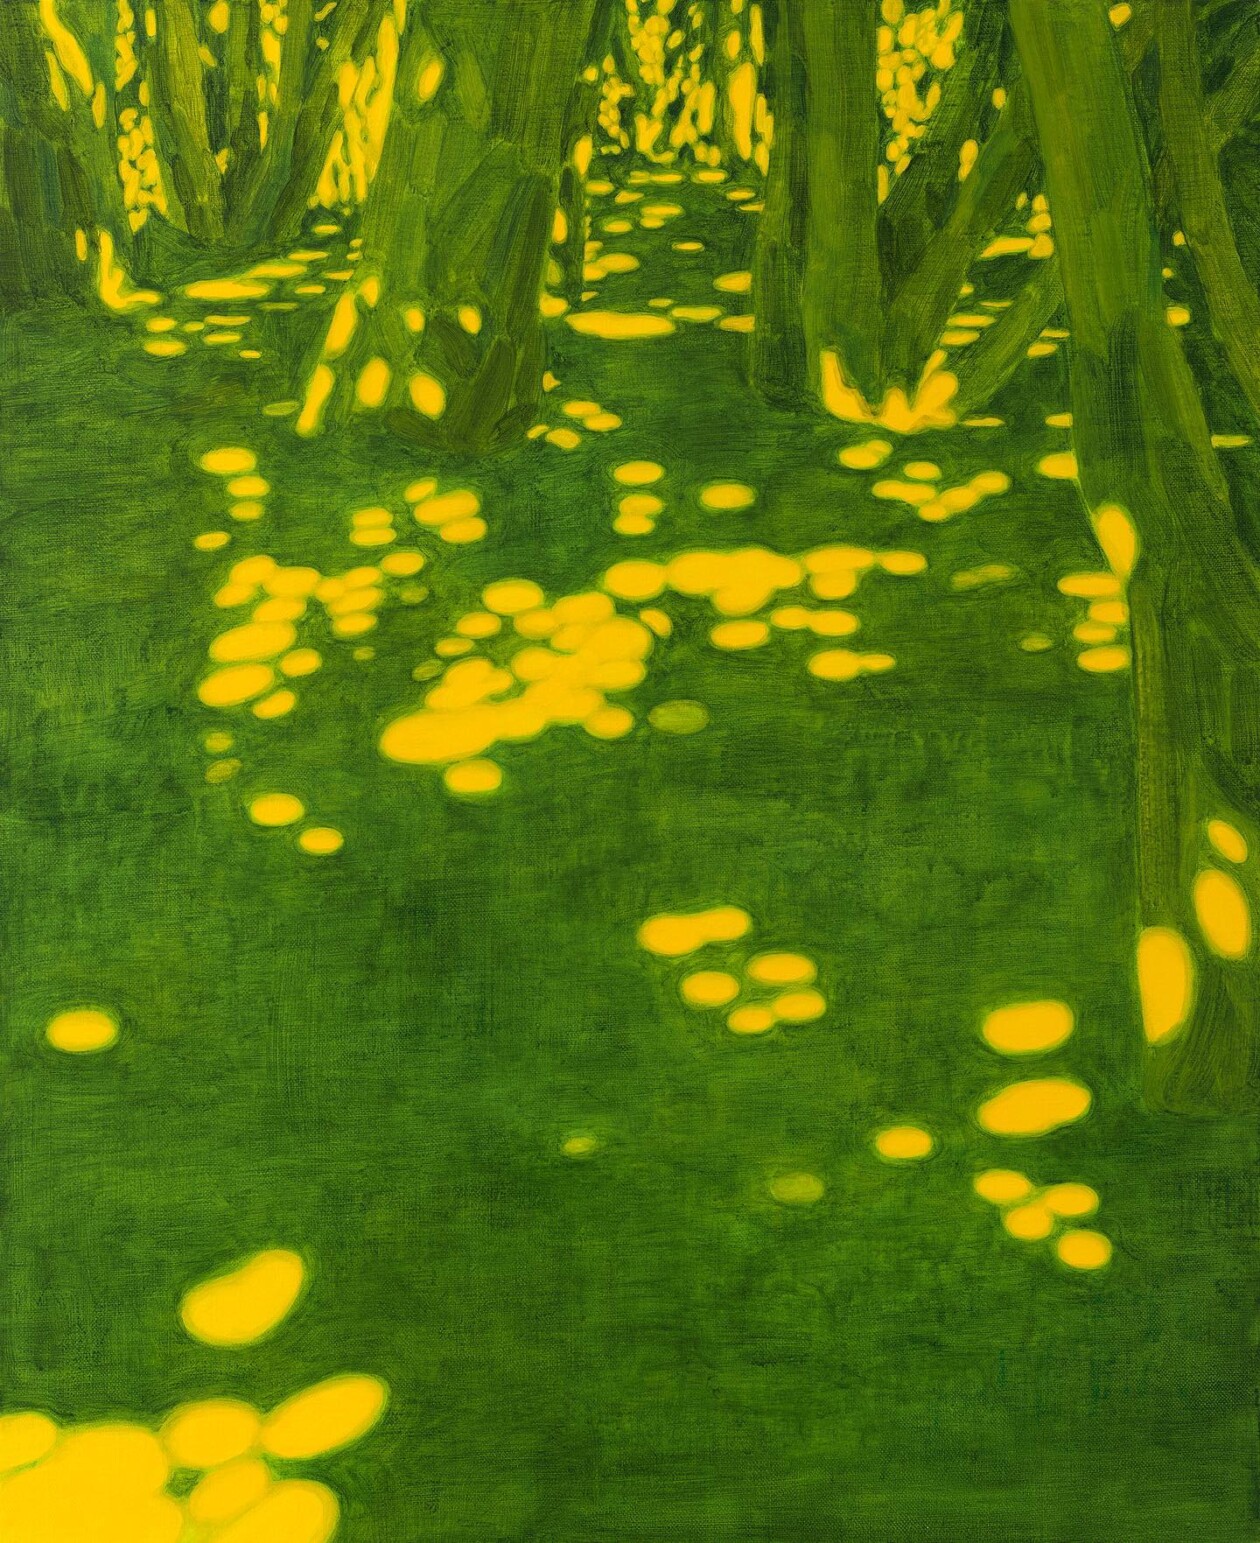 Paintings Of Lights And Shadows By Duri Baek (6)